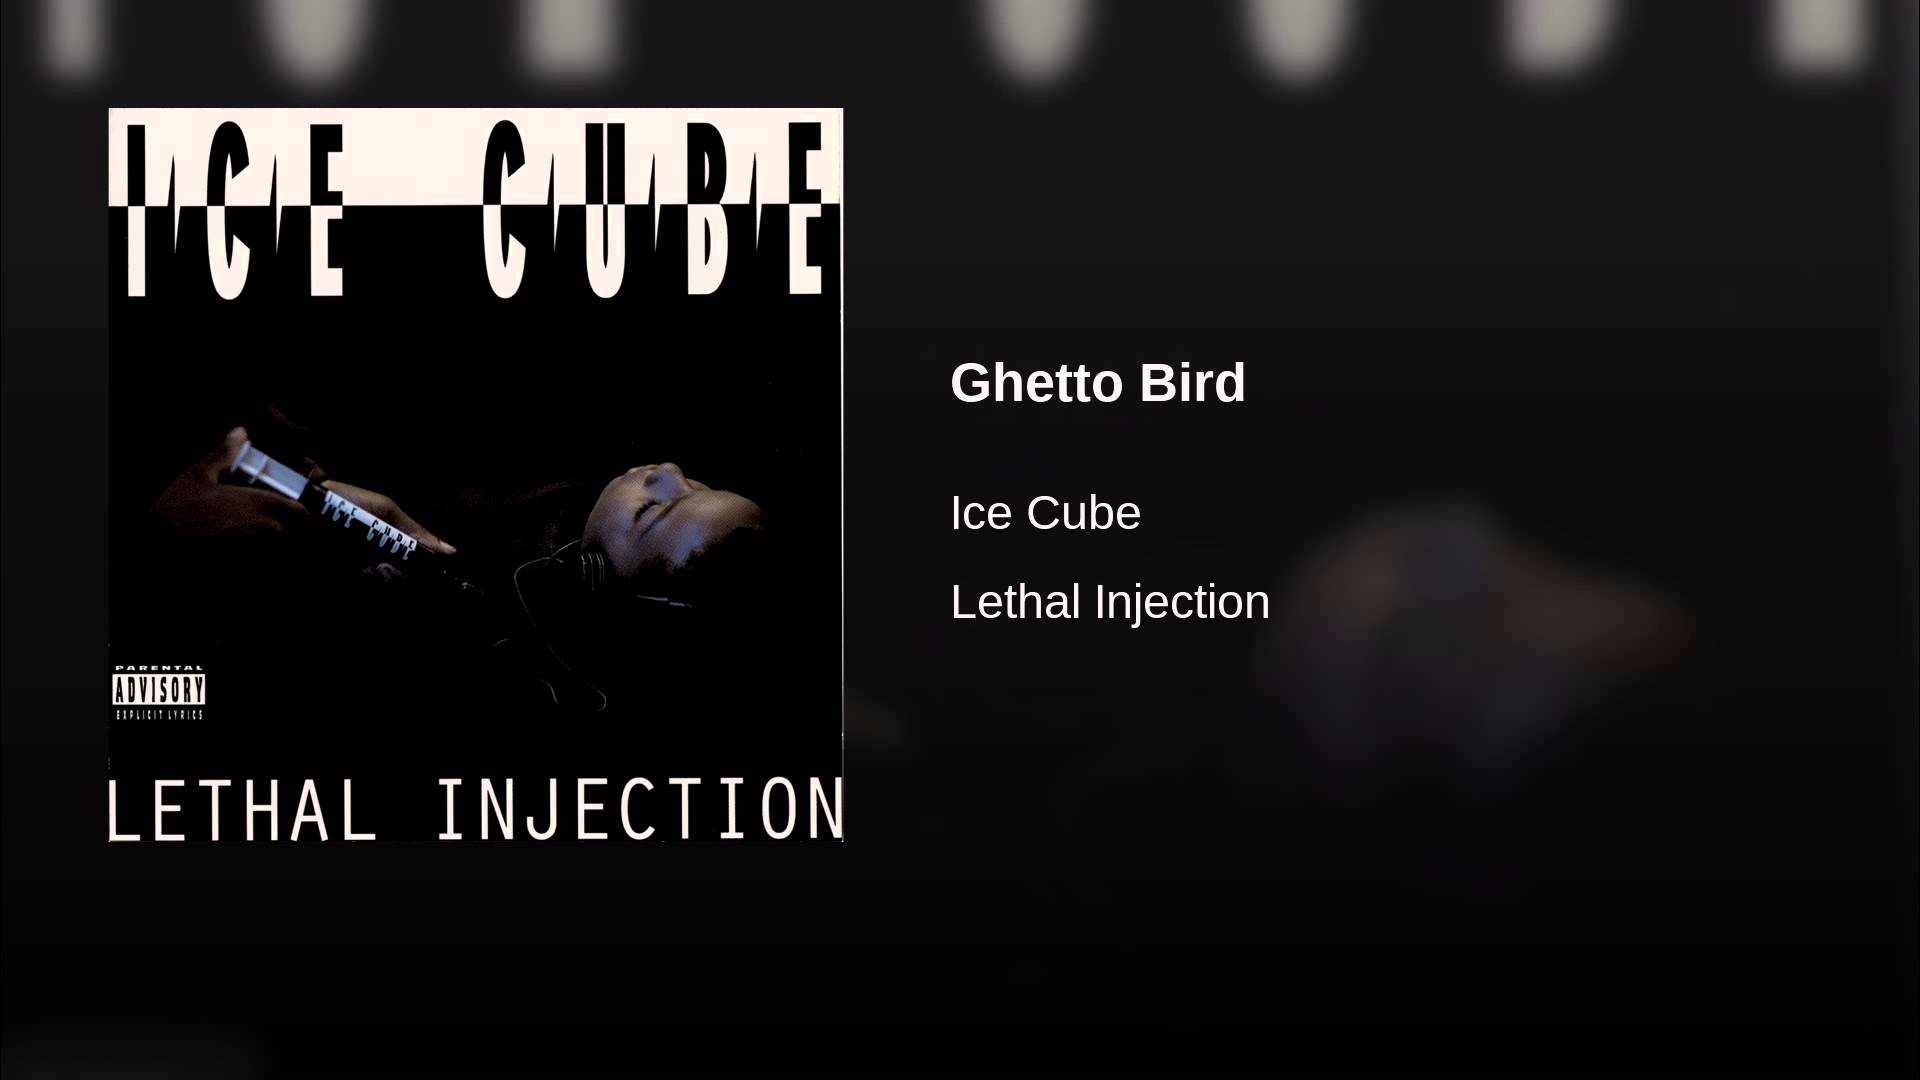 Ice cube you know. Ice Cube you know how we do it. Ice Cube Lethal Injection. Ghetto Bird от Ice Cube. Ice Cube you know how.